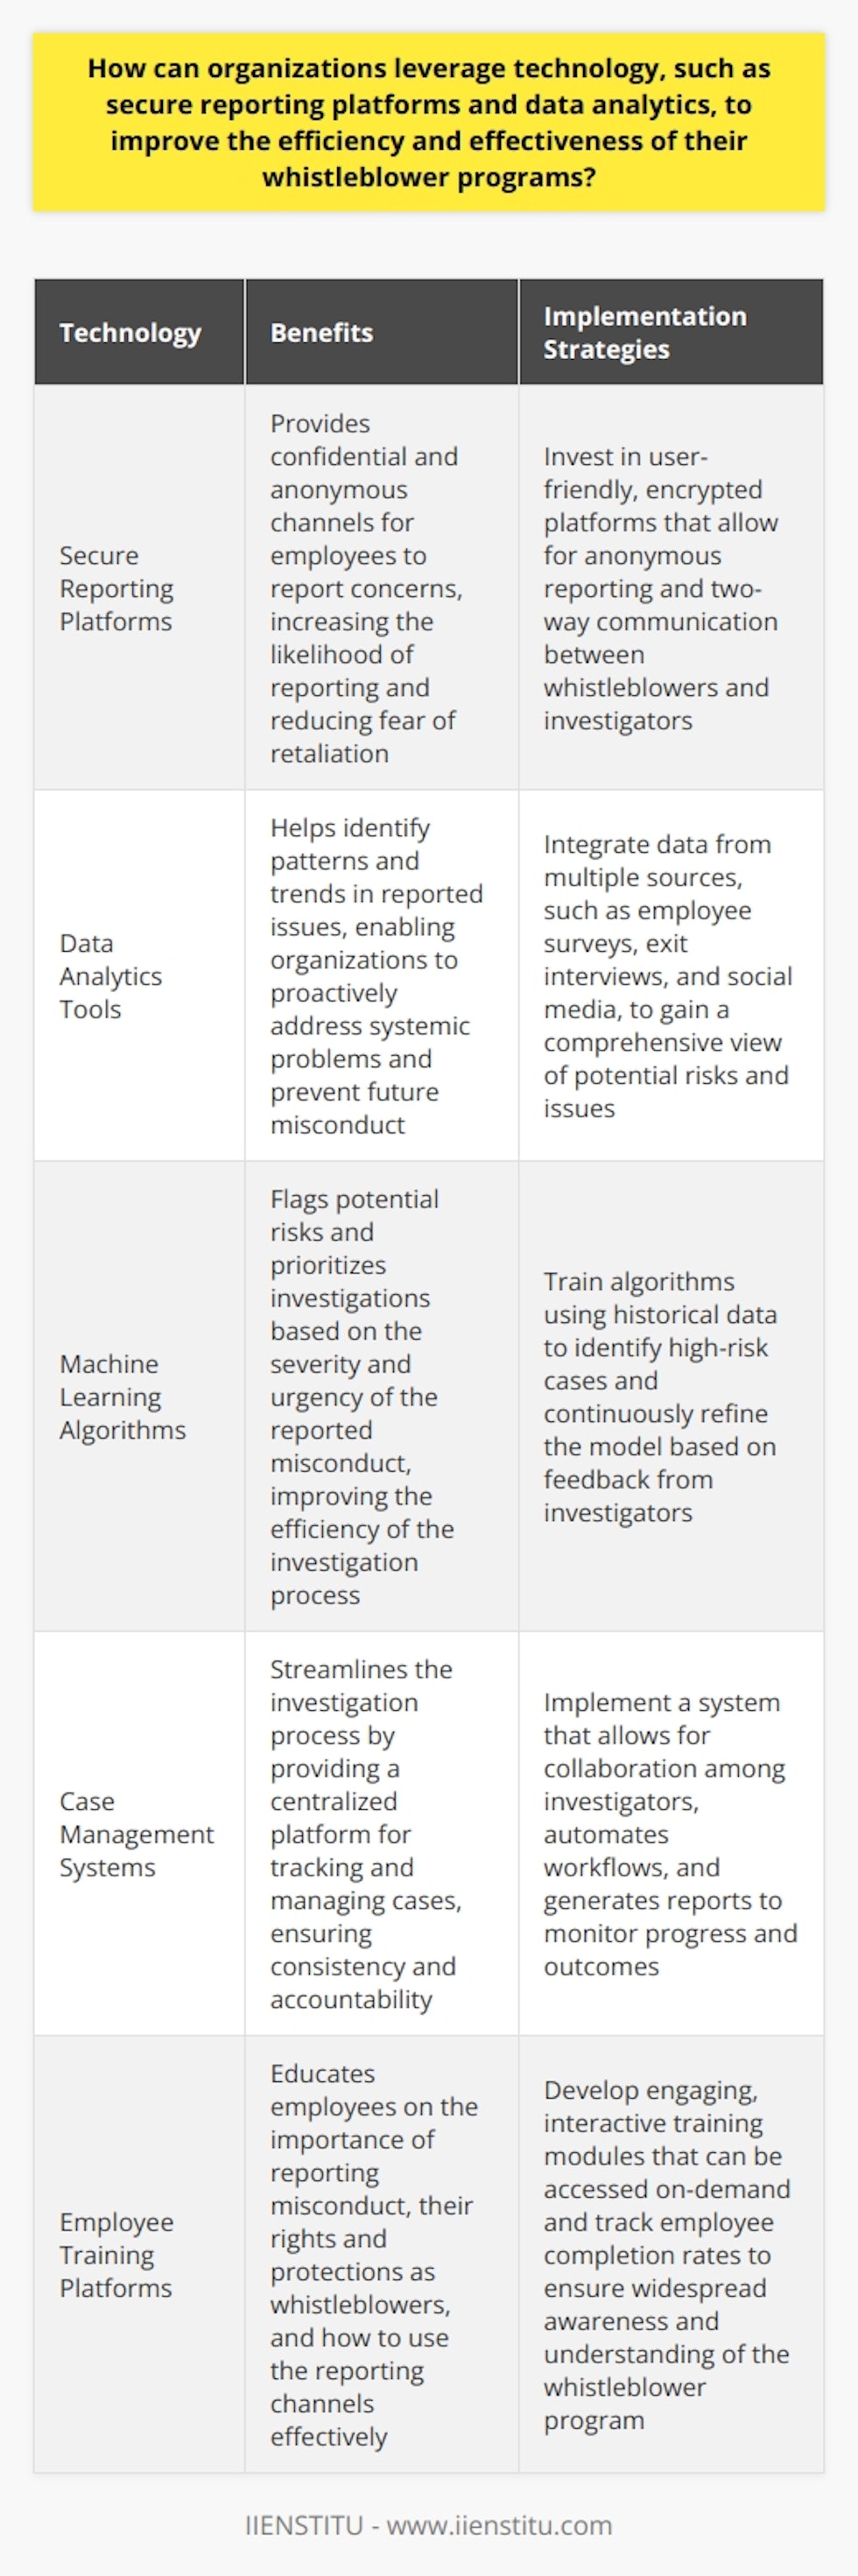 Technology can play a significant role in improving the efficiency and effectiveness of whistleblower programs. Secure reporting platforms can provide a confidential and anonymous channel for employees to report concerns, while data analytics tools can help identify patterns and trends in reported issues. Organizations can also leverage machine learning algorithms to flag potential risks and prioritize investigations based on the severity and urgency of the reported misconduct.